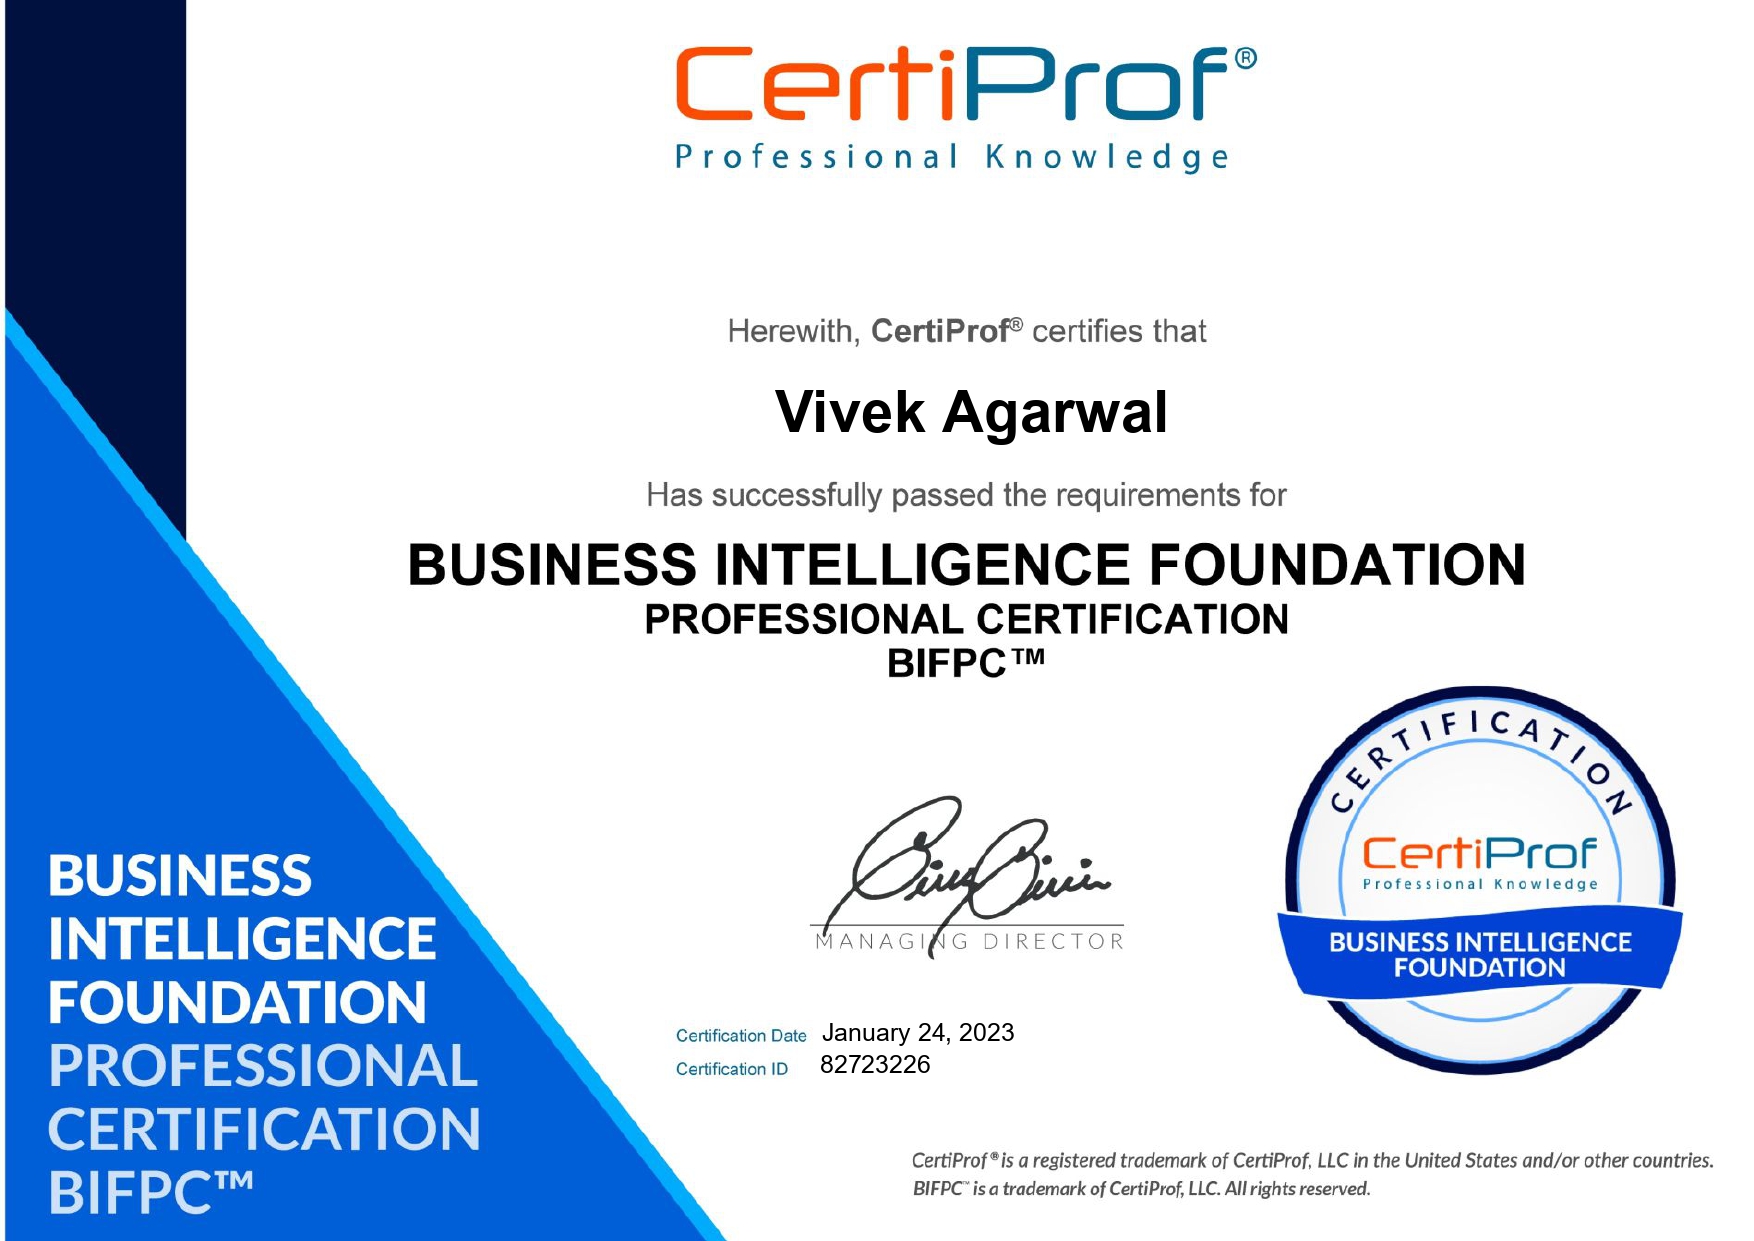 Free Certification Exam | Business Intelligence Foundation Professional Certification by Certiprof